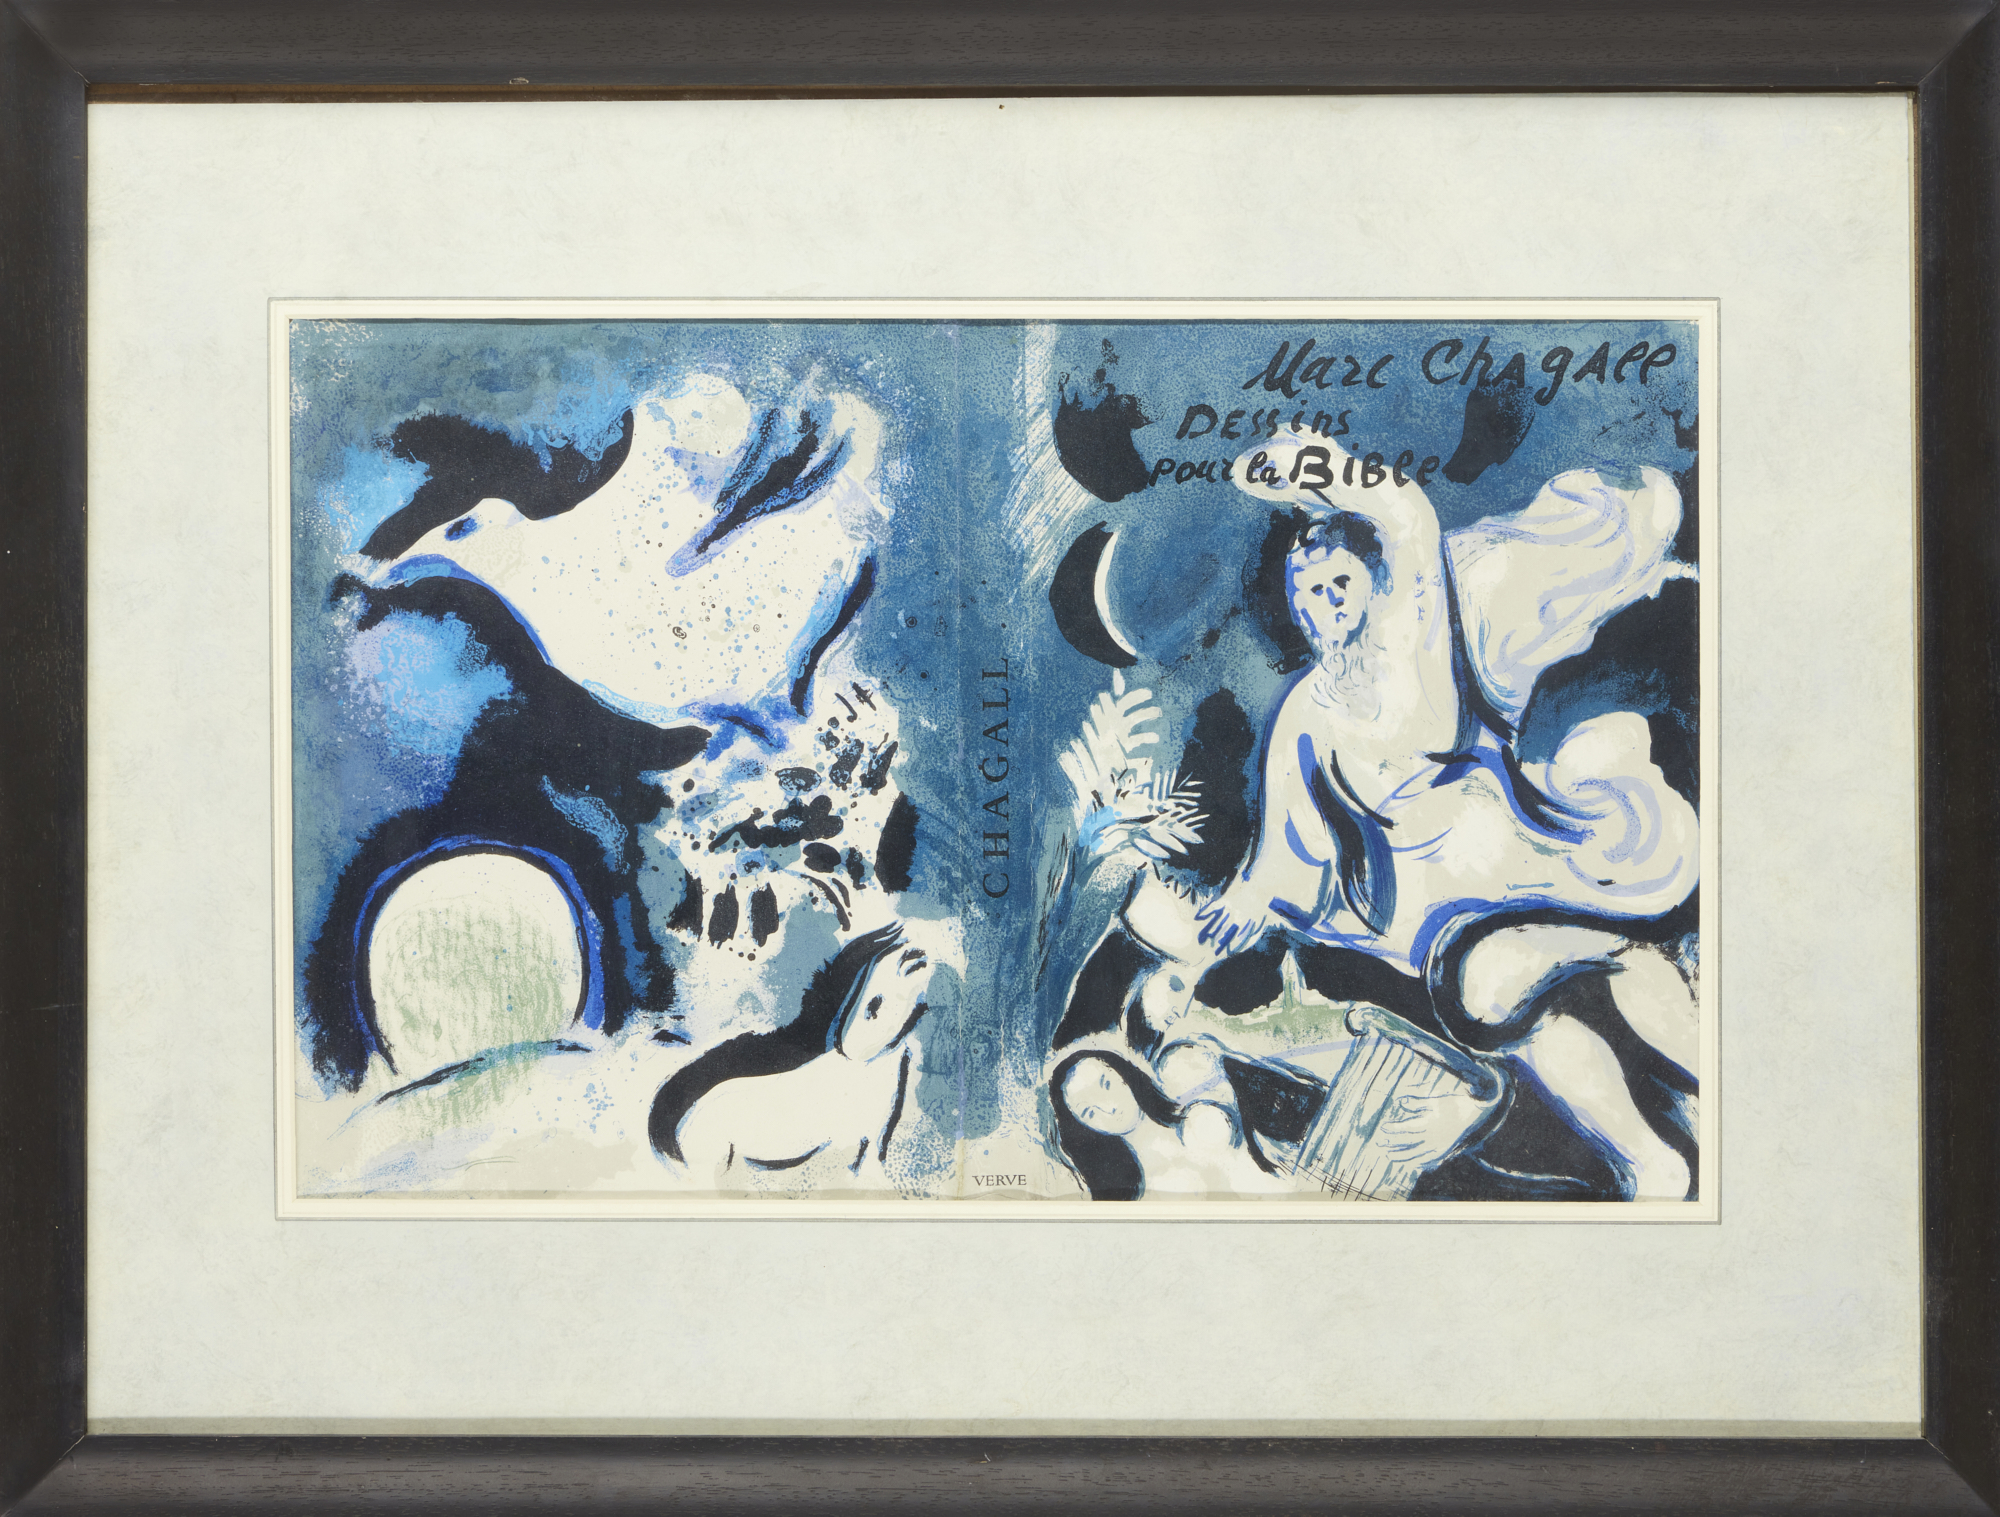 Marc Chagall, French/Russian 1887-1985,  Dessins pour la Bible, 1956-60 (cover for Verve Vol X, ... - Image 2 of 2